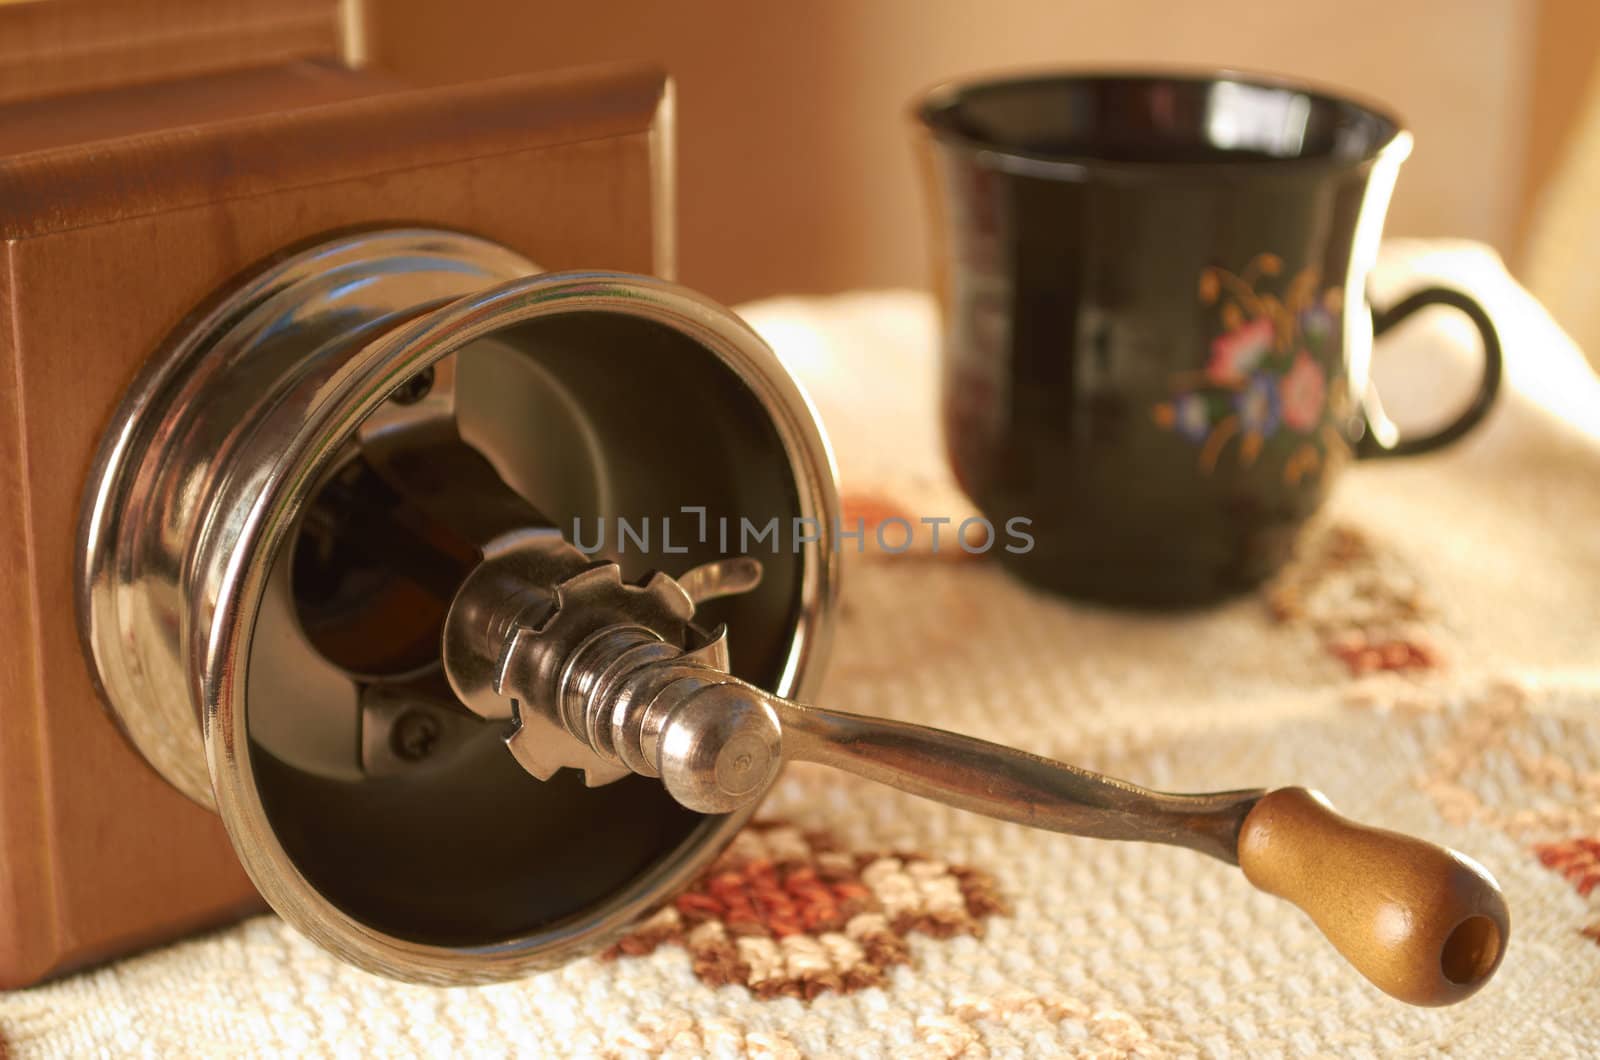 Manual coffee grinder and ceramic cup on woven tablecloth